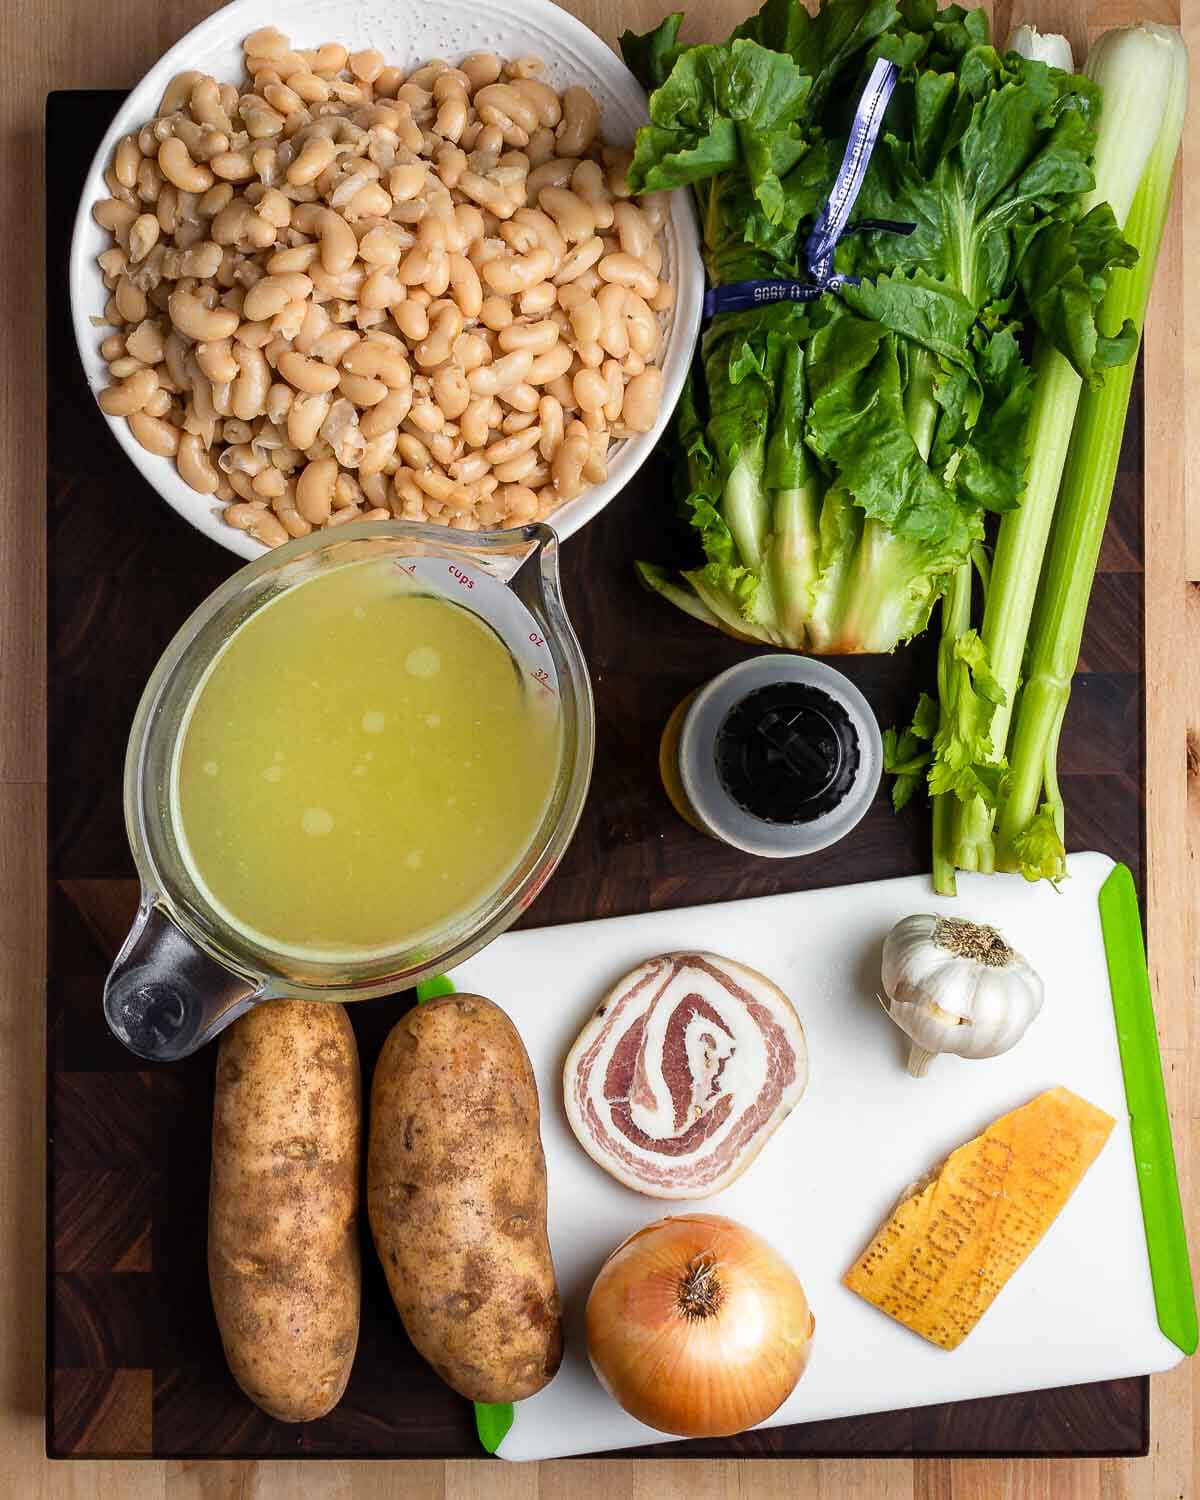 Ingredients shown: cannellini beans, escarole, celery, chicken stock, olive oil, potatoes, pancetta, onion, garlic, and Parmigiano rind.